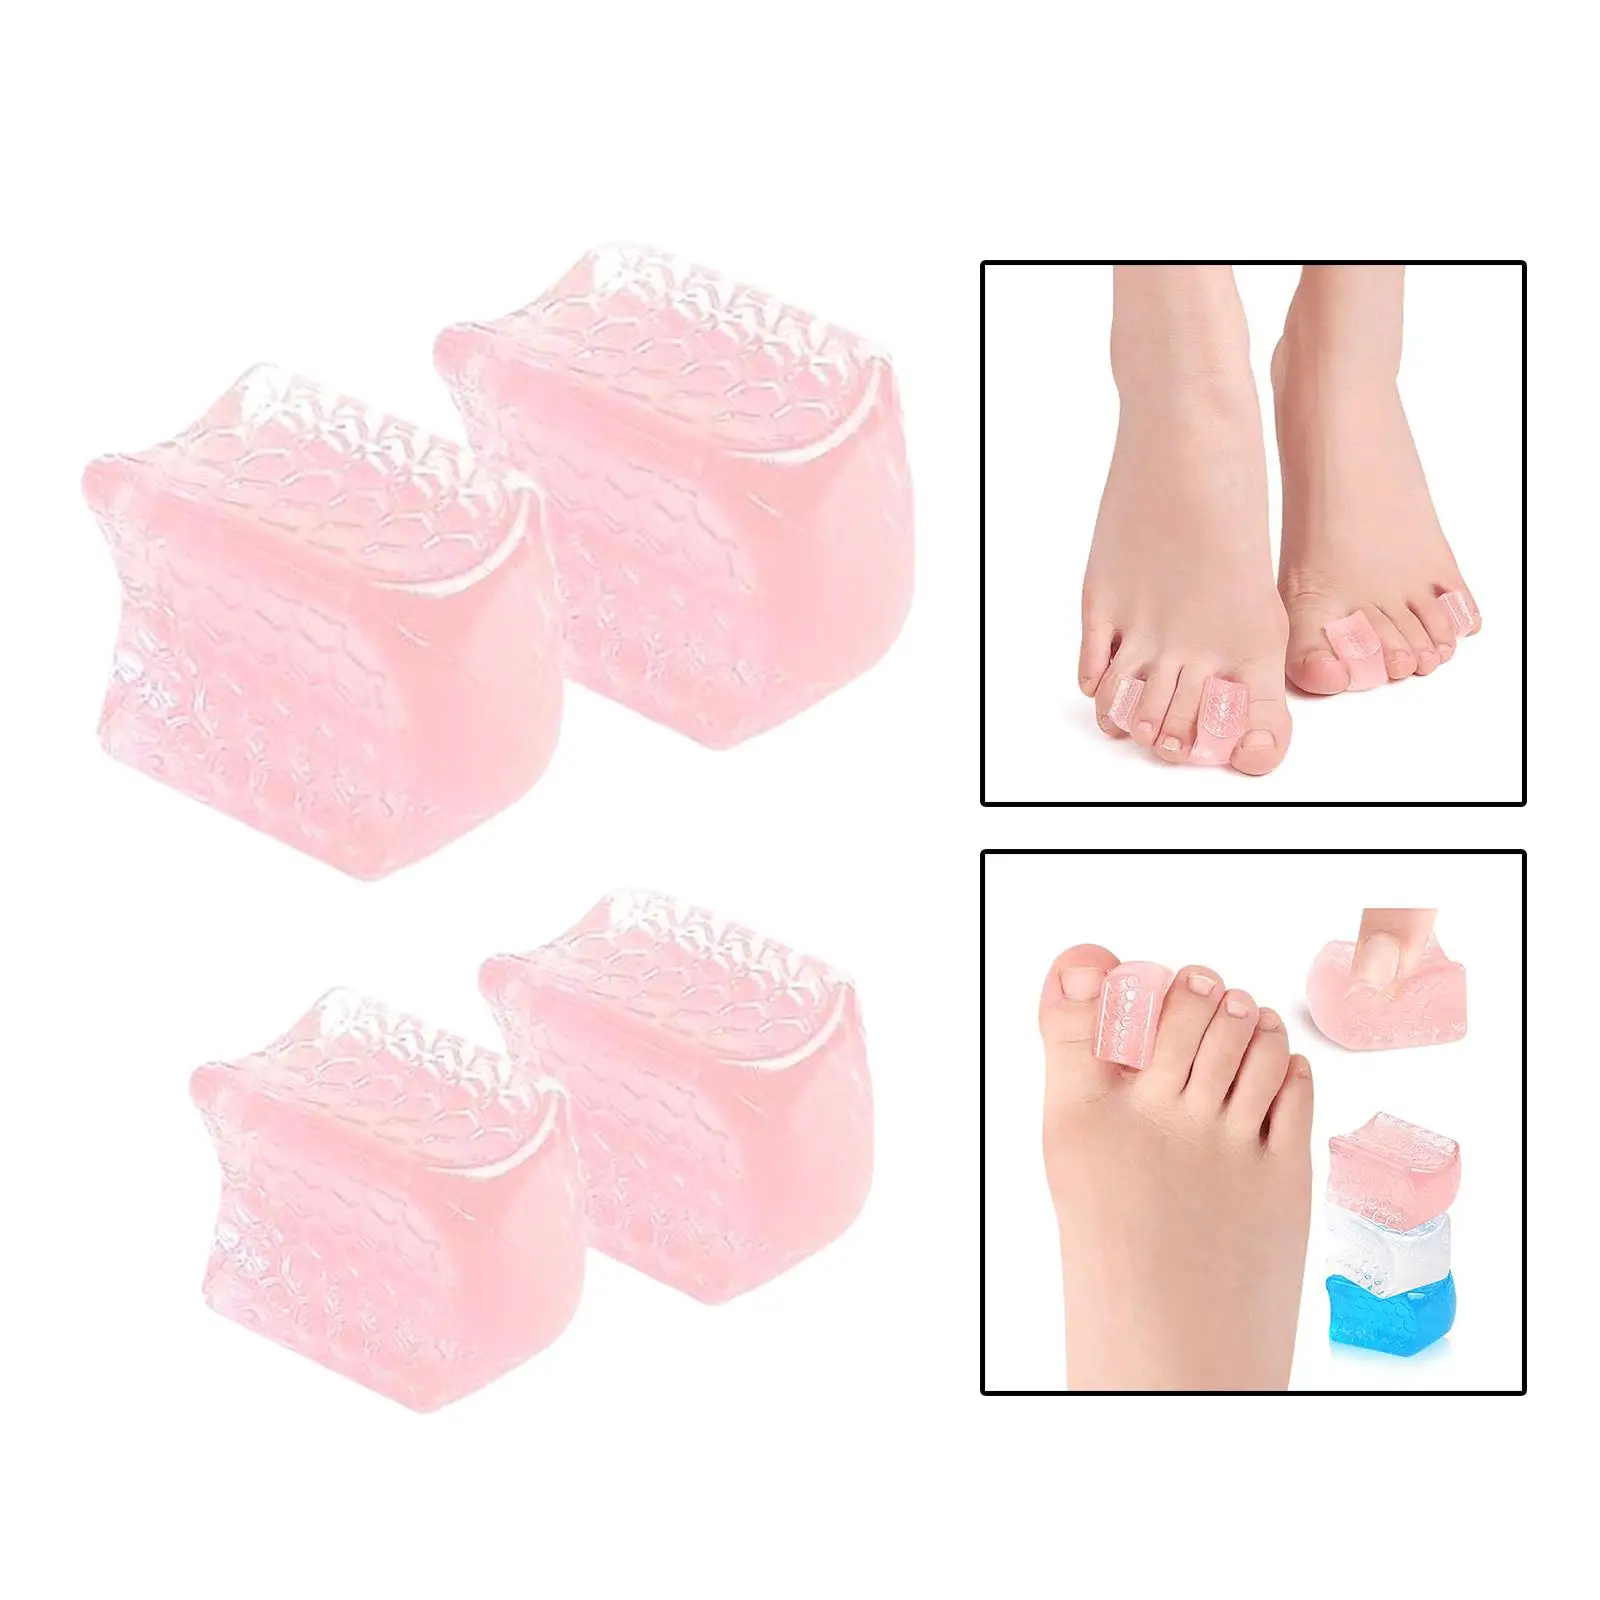 4 Pieces Silicone Toe Separators Stretcher Cushions Corrector Protector Washable Reusable Easy to Clean Separate Overlapping Toe